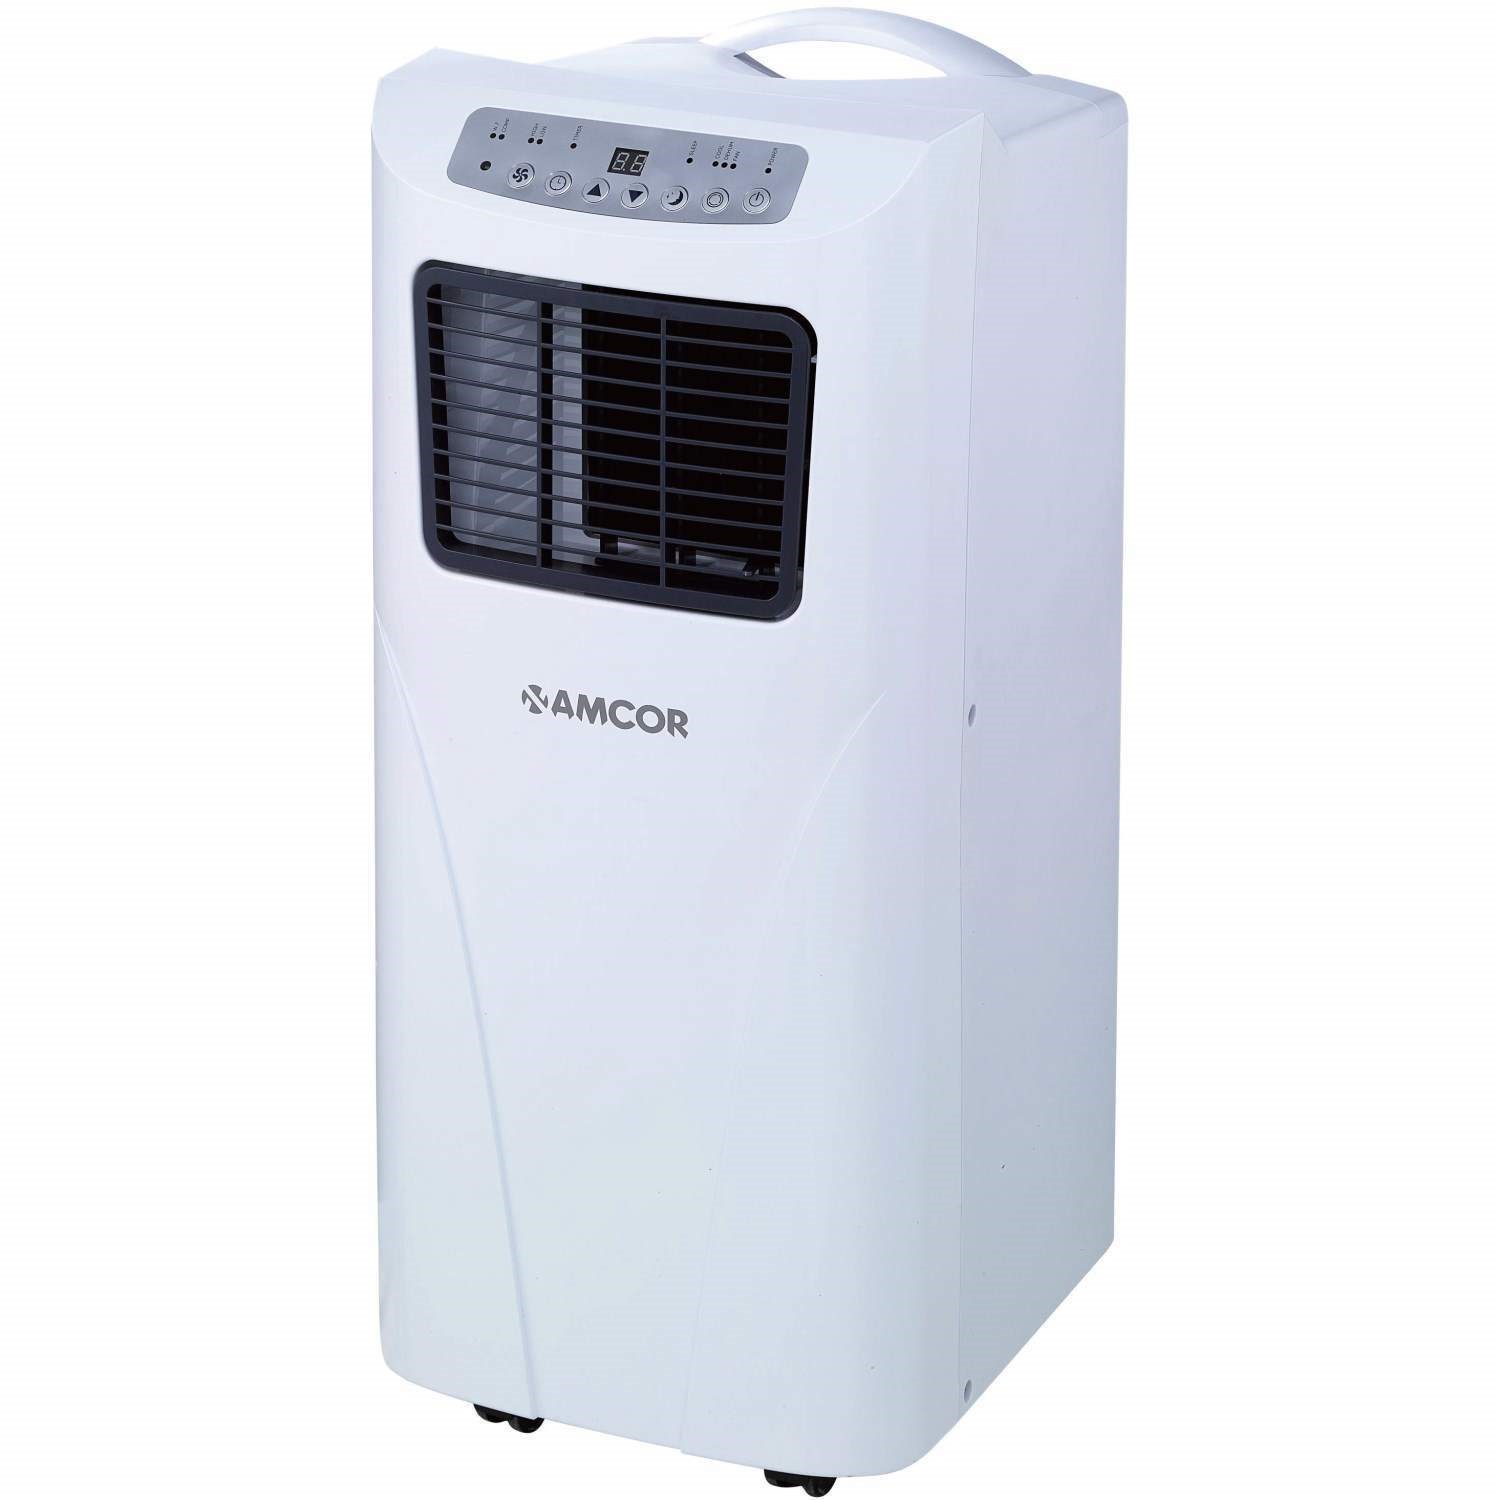 Guggenheim Museum Imperialisme speling Buy Amcor SF10000E slimline portable Air Conditioner for rooms up to 20 sqm  from Aircon Direct